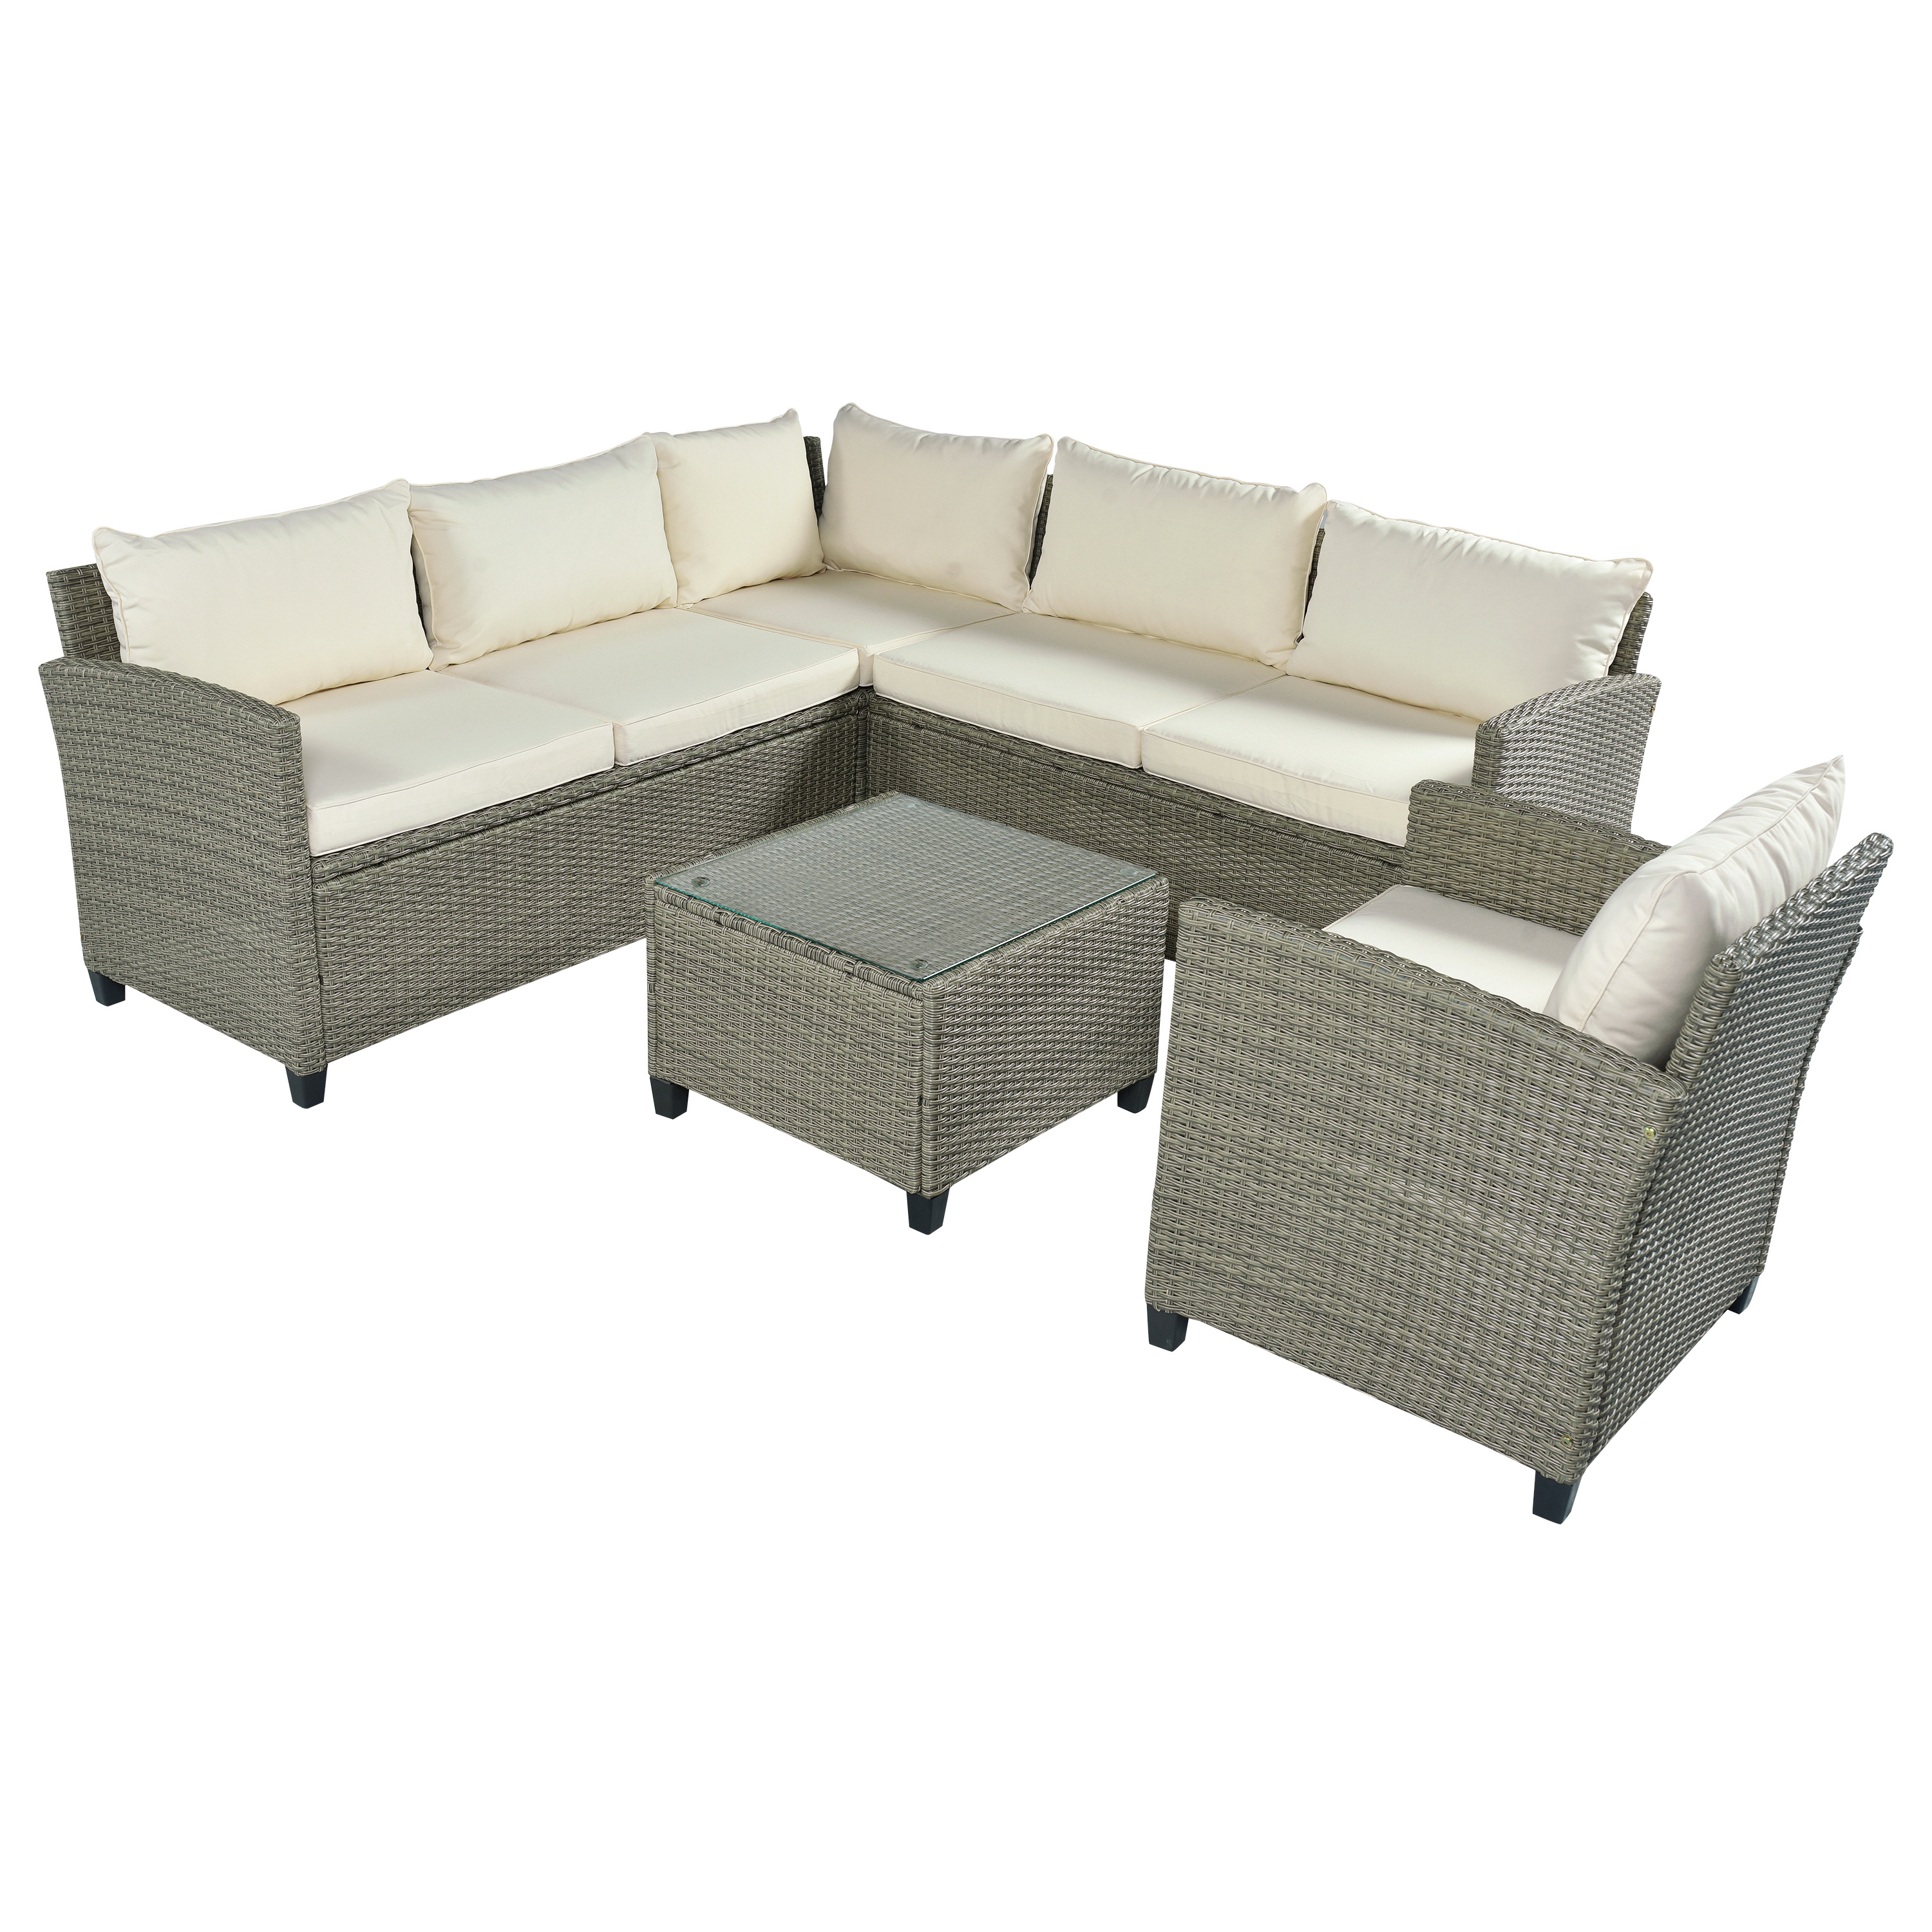  Patio Furniture Set, 5 Piece Outdoor Conversation Set，with Coffee Table, Cushions and Single Chair-CASAINC